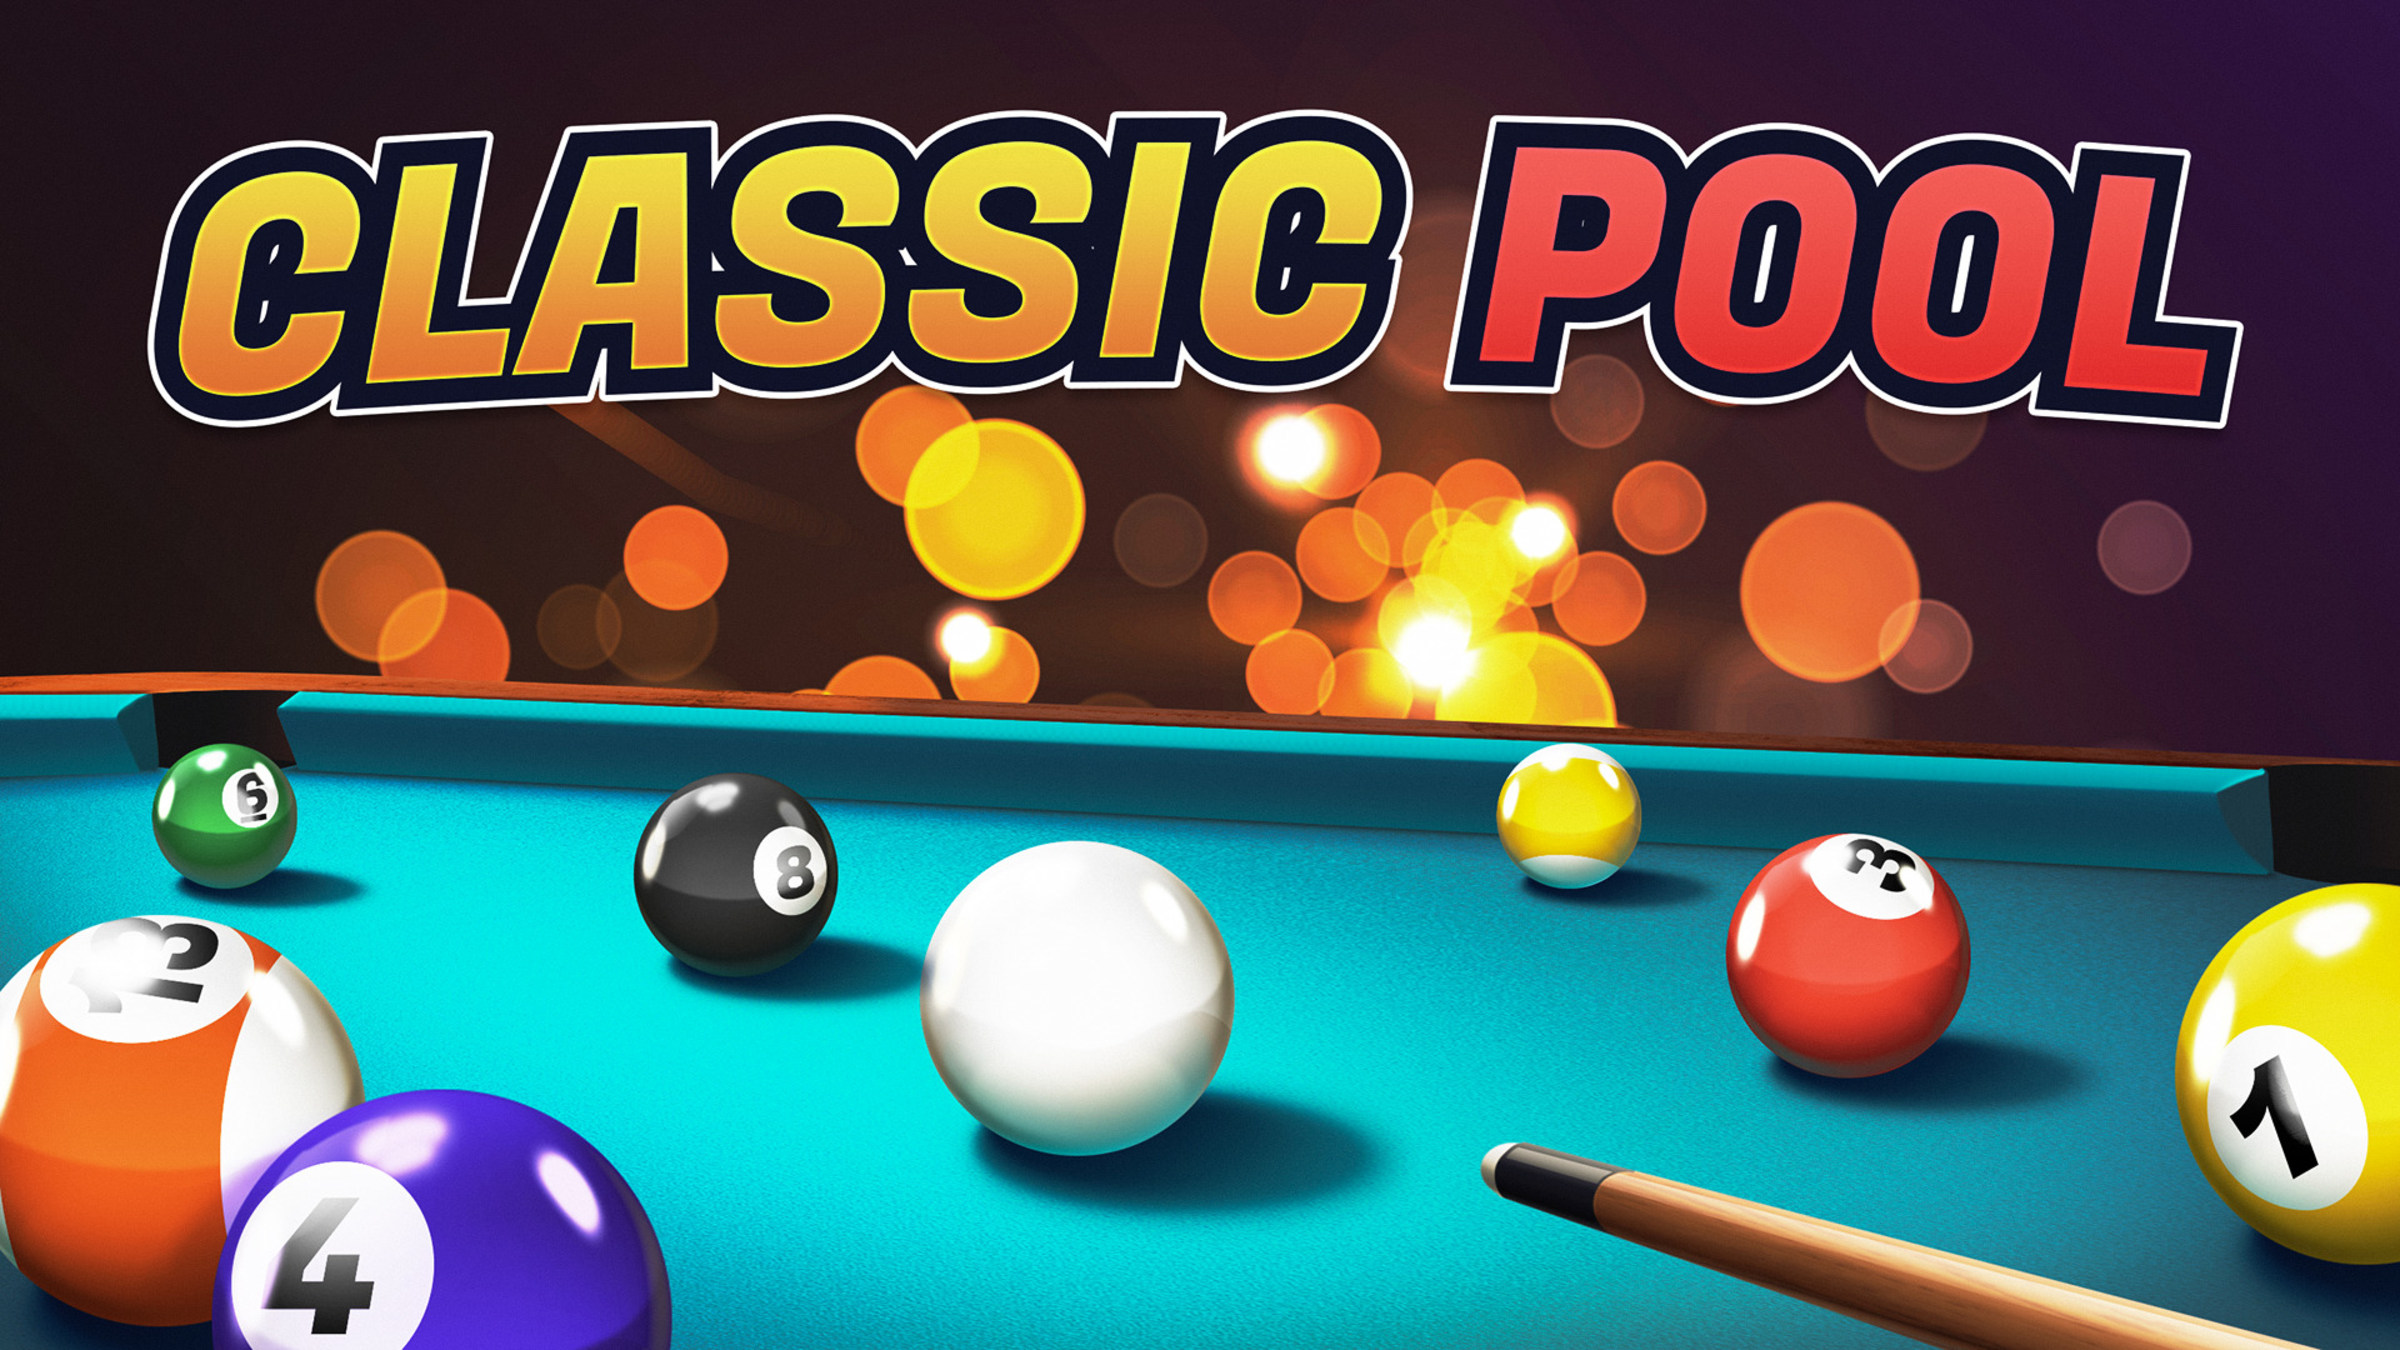 Classic Pool for Nintendo Switch